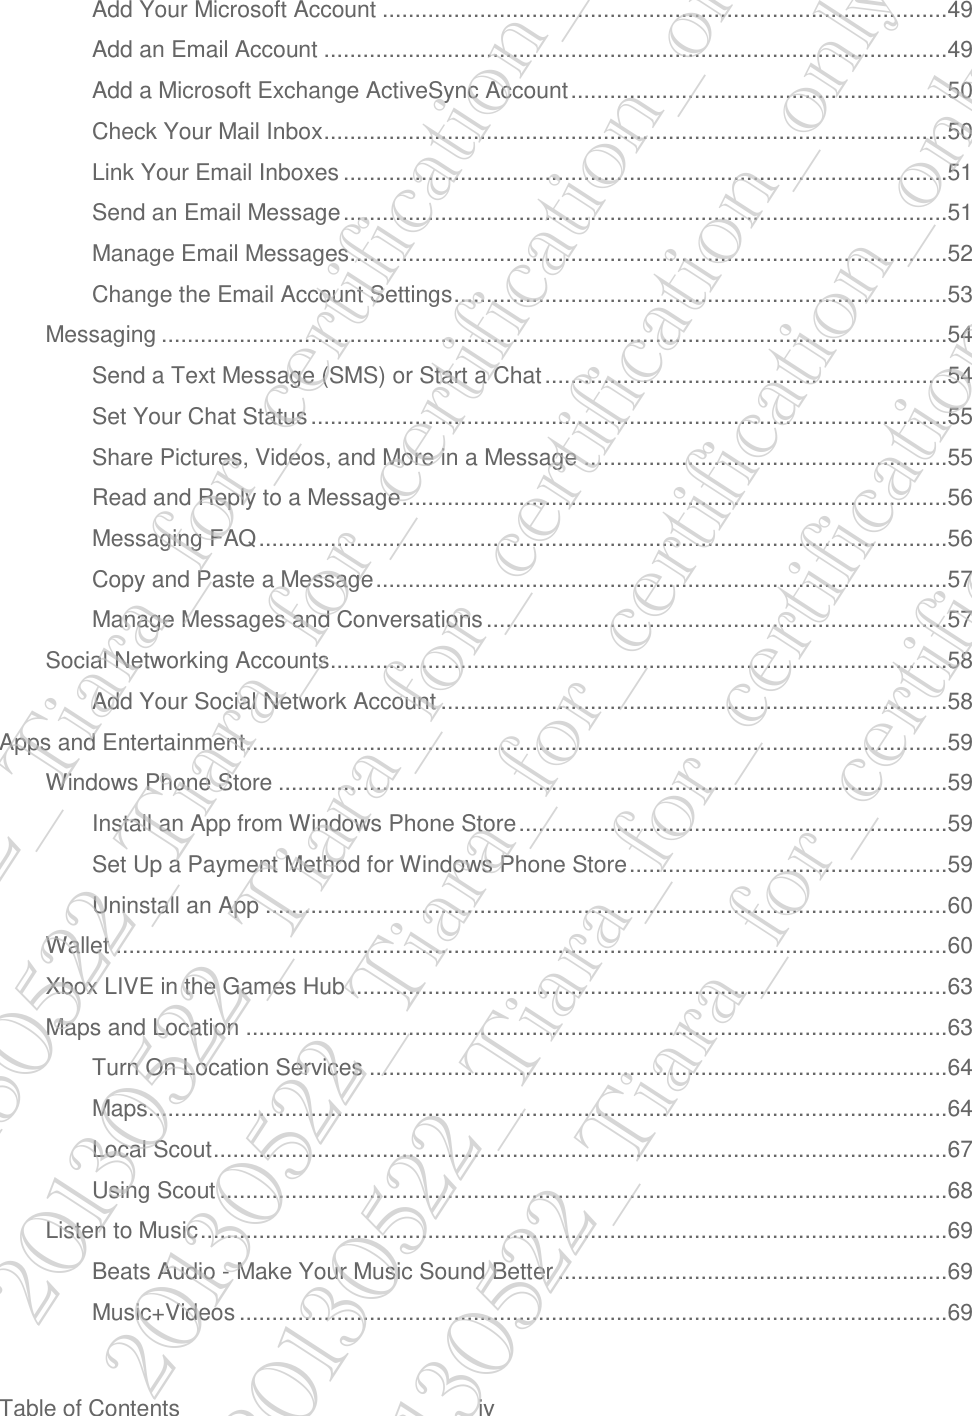  Table of Contents  iv Add Your Microsoft Account .......................................................................................49 Add an Email Account ................................................................................................49 Add a Microsoft Exchange ActiveSync Account ..........................................................50 Check Your Mail Inbox ................................................................................................50 Link Your Email Inboxes .............................................................................................51 Send an Email Message .............................................................................................51 Manage Email Messages ............................................................................................52 Change the Email Account Settings ............................................................................53 Messaging .........................................................................................................................54 Send a Text Message (SMS) or Start a Chat ..............................................................54 Set Your Chat Status ..................................................................................................55 Share Pictures, Videos, and More in a Message ........................................................55 Read and Reply to a Message ....................................................................................56 Messaging FAQ ..........................................................................................................56 Copy and Paste a Message ........................................................................................57 Manage Messages and Conversations .......................................................................57 Social Networking Accounts ...............................................................................................58 Add Your Social Network Account ..............................................................................58 Apps and Entertainment ............................................................................................................59 Windows Phone Store .......................................................................................................59 Install an App from Windows Phone Store ..................................................................59 Set Up a Payment Method for Windows Phone Store .................................................59 Uninstall an App .........................................................................................................60 Wallet ................................................................................................................................60 Xbox LIVE in the Games Hub ............................................................................................63 Maps and Location ............................................................................................................63 Turn On Location Services .........................................................................................64 Maps...........................................................................................................................64 Local Scout .................................................................................................................67 Using Scout ................................................................................................................68 Listen to Music ...................................................................................................................69 Beats Audio - Make Your Music Sound Better ............................................................69 Music+Videos .............................................................................................................69 20130522_Tiara_for_certification_only 20130522_Tiara_for_certification_only 20130522_Tiara_for_certification_only 20130522_Tiara_for_certification_only 20130522_Tiara_for_certification_only 20130522_Tiara_for_certification_only